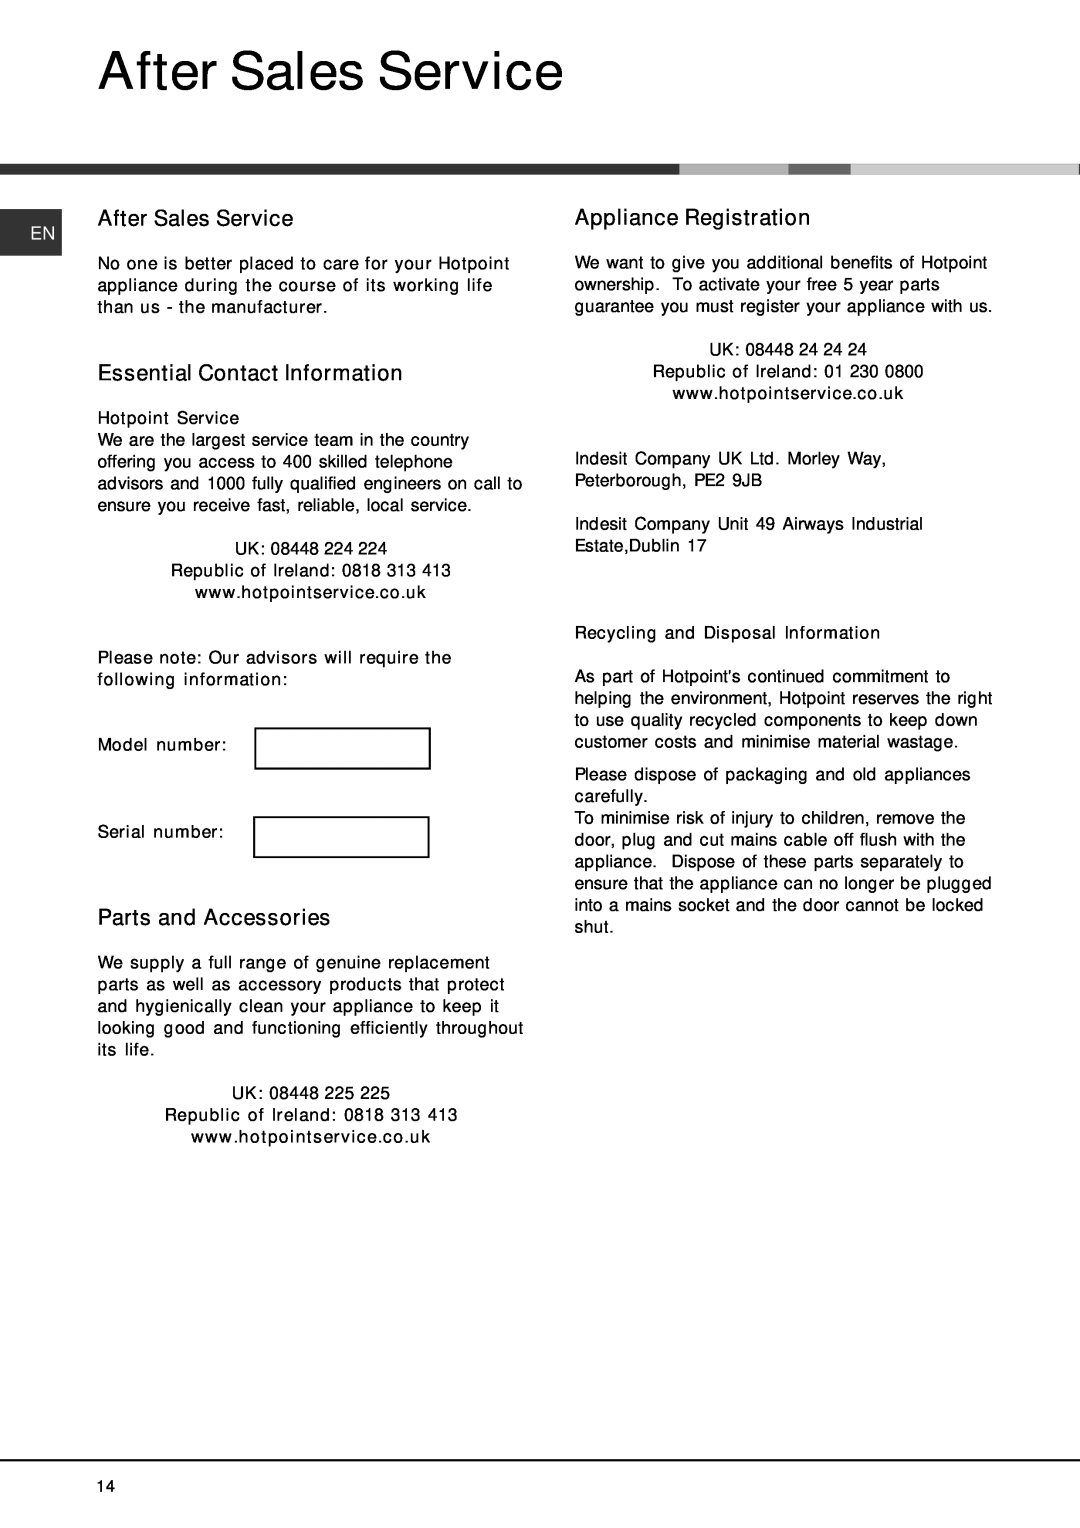 Hotpoint LFS 114 manual After Sales Service, Essential Contact Information, Parts and Accessories, Appliance Registration 